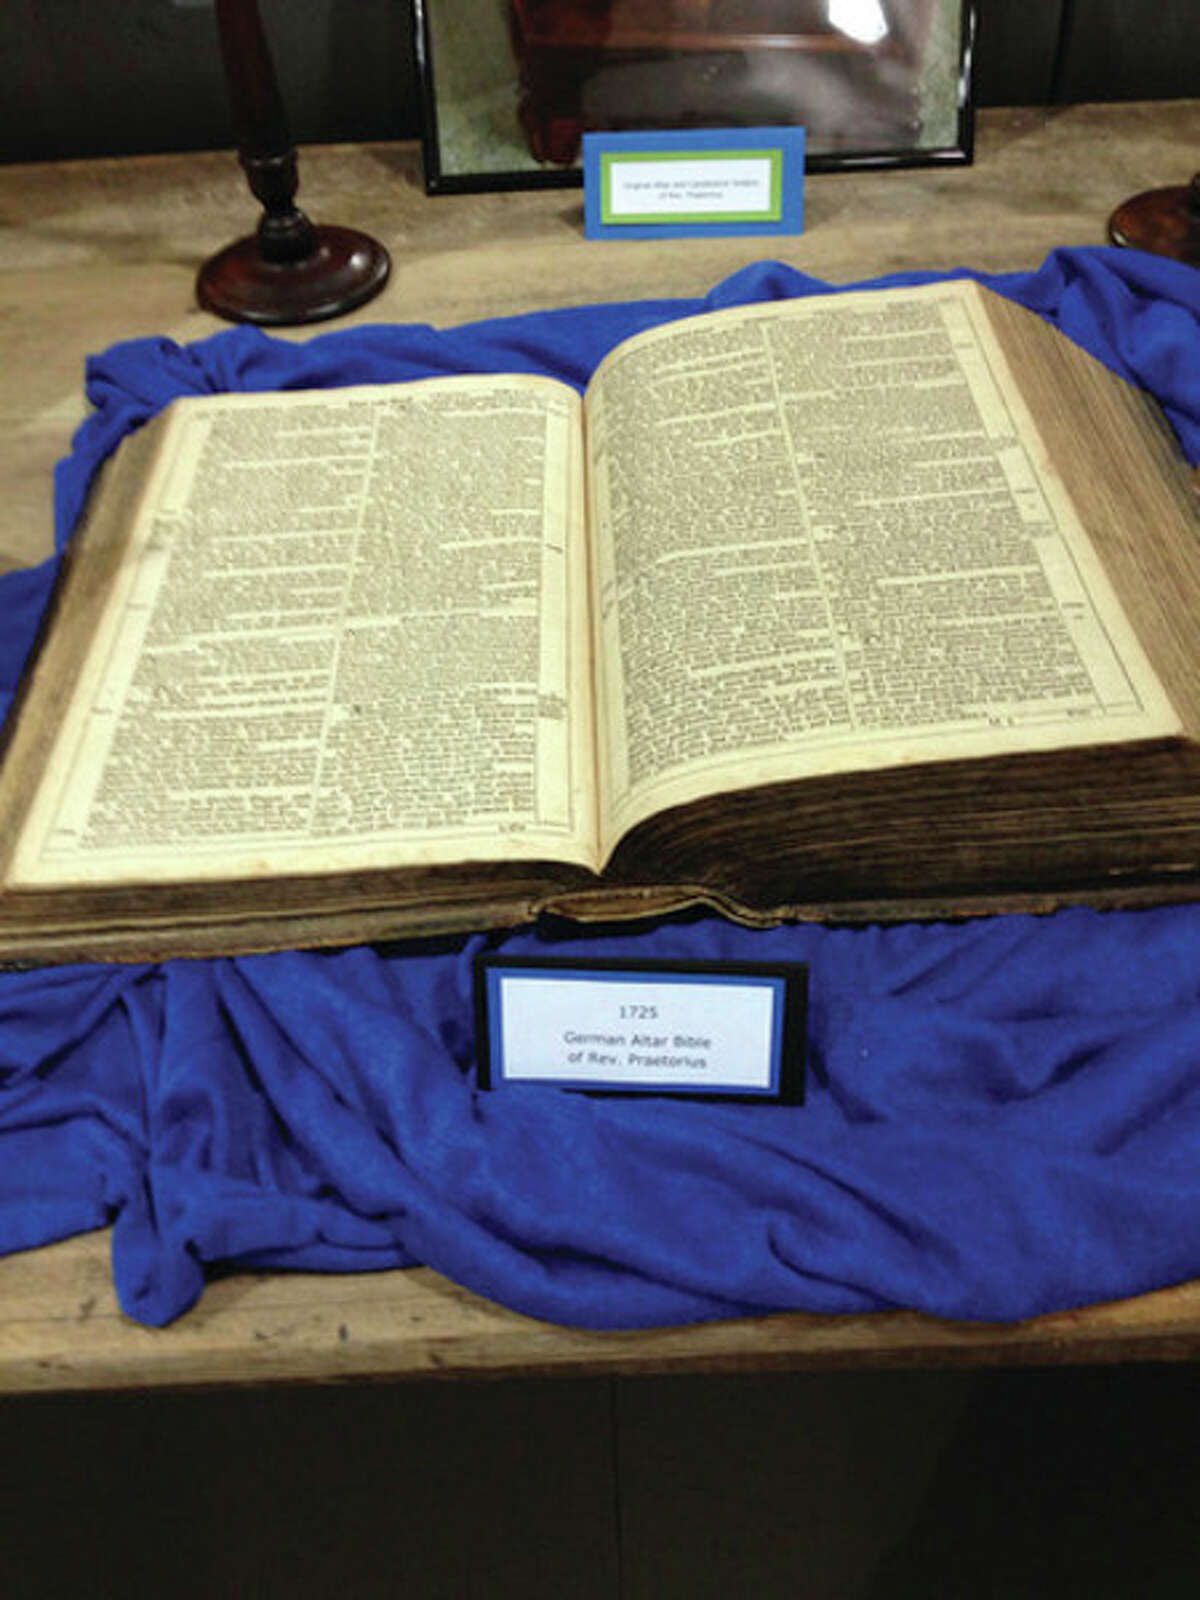 This German Bible was provided by Mary Otto, great granddaughter of Rev. C. Richard Praetorius. It dates back to 1725. (Submitted Photo)